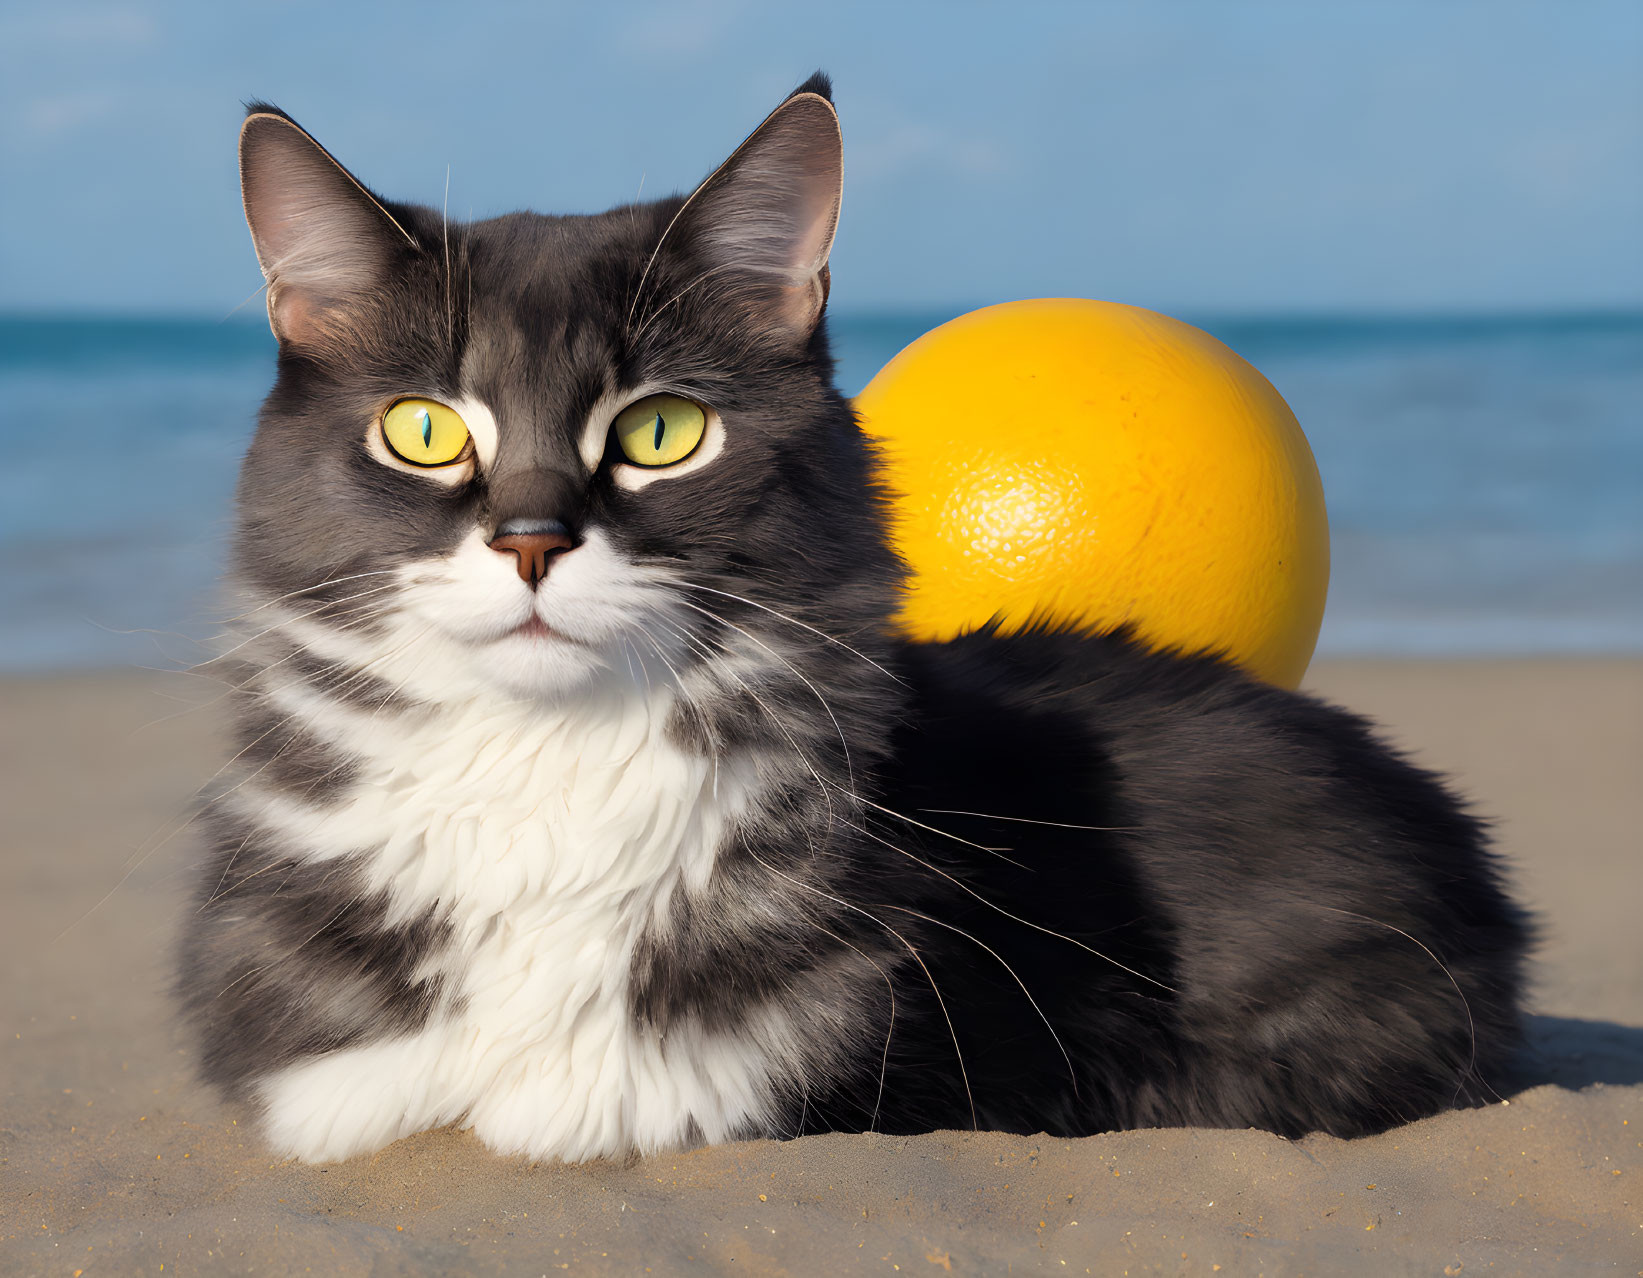 Grey and White Cat with Yellow Eyes on Beach with Lemon and Blue Sky